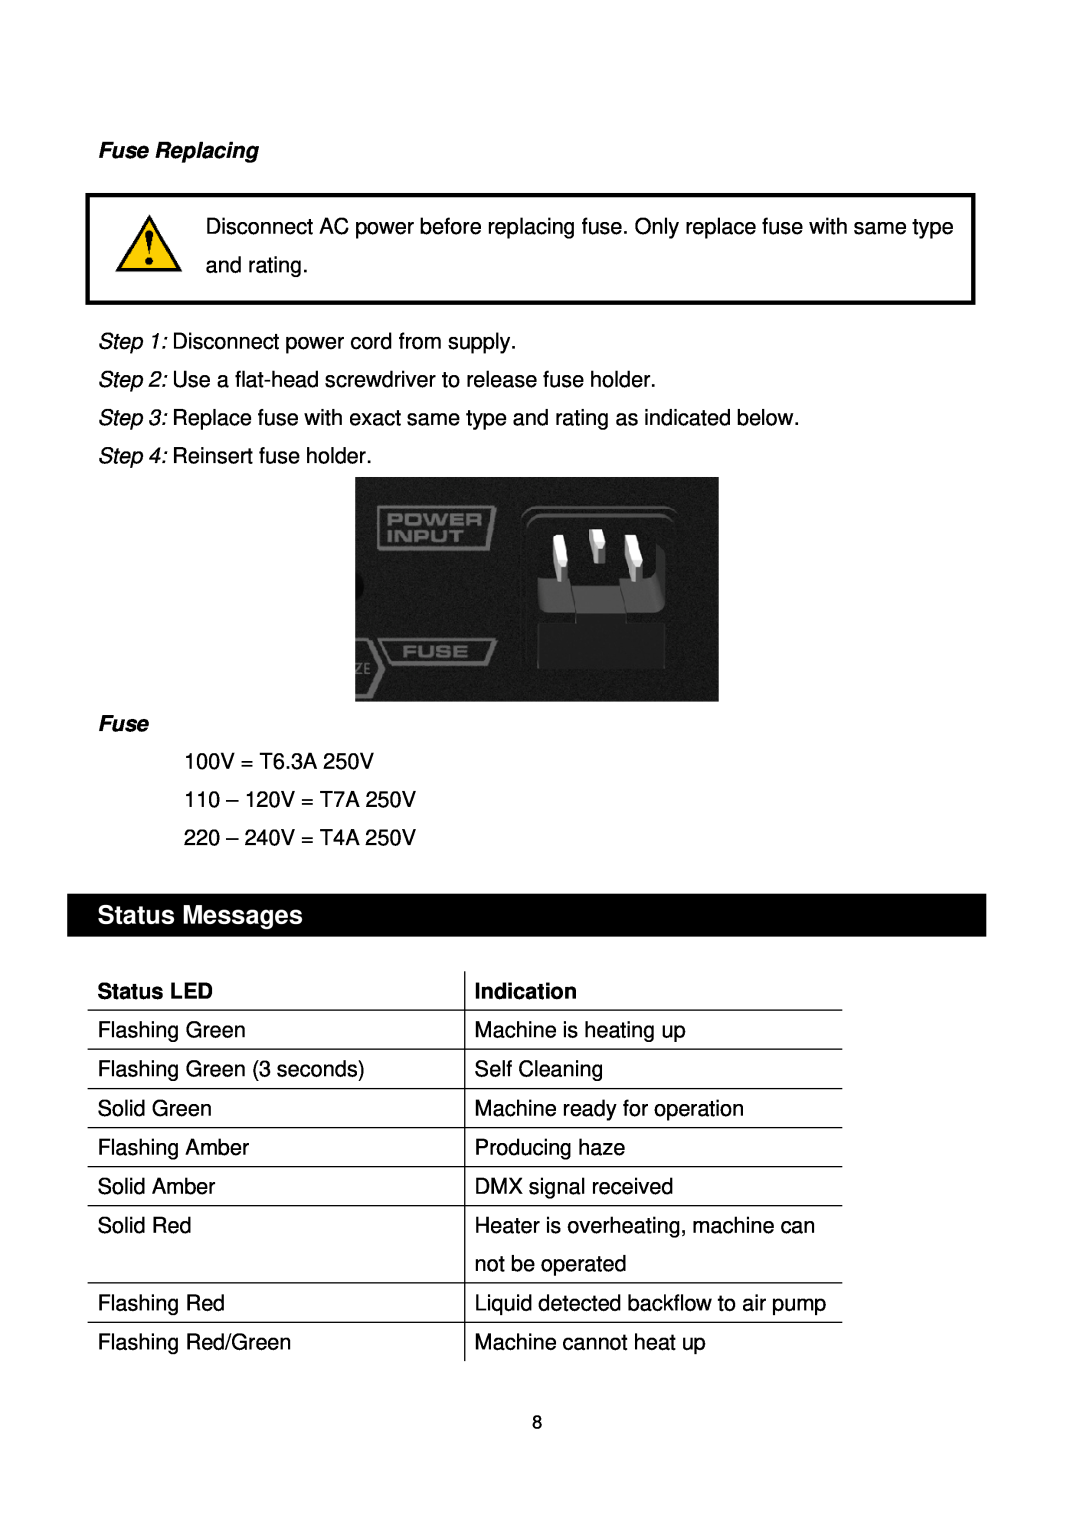 Antari Lighting and Effects Z-350 user manual Status Messages, Fuse Replacing, Status LED, Indication 